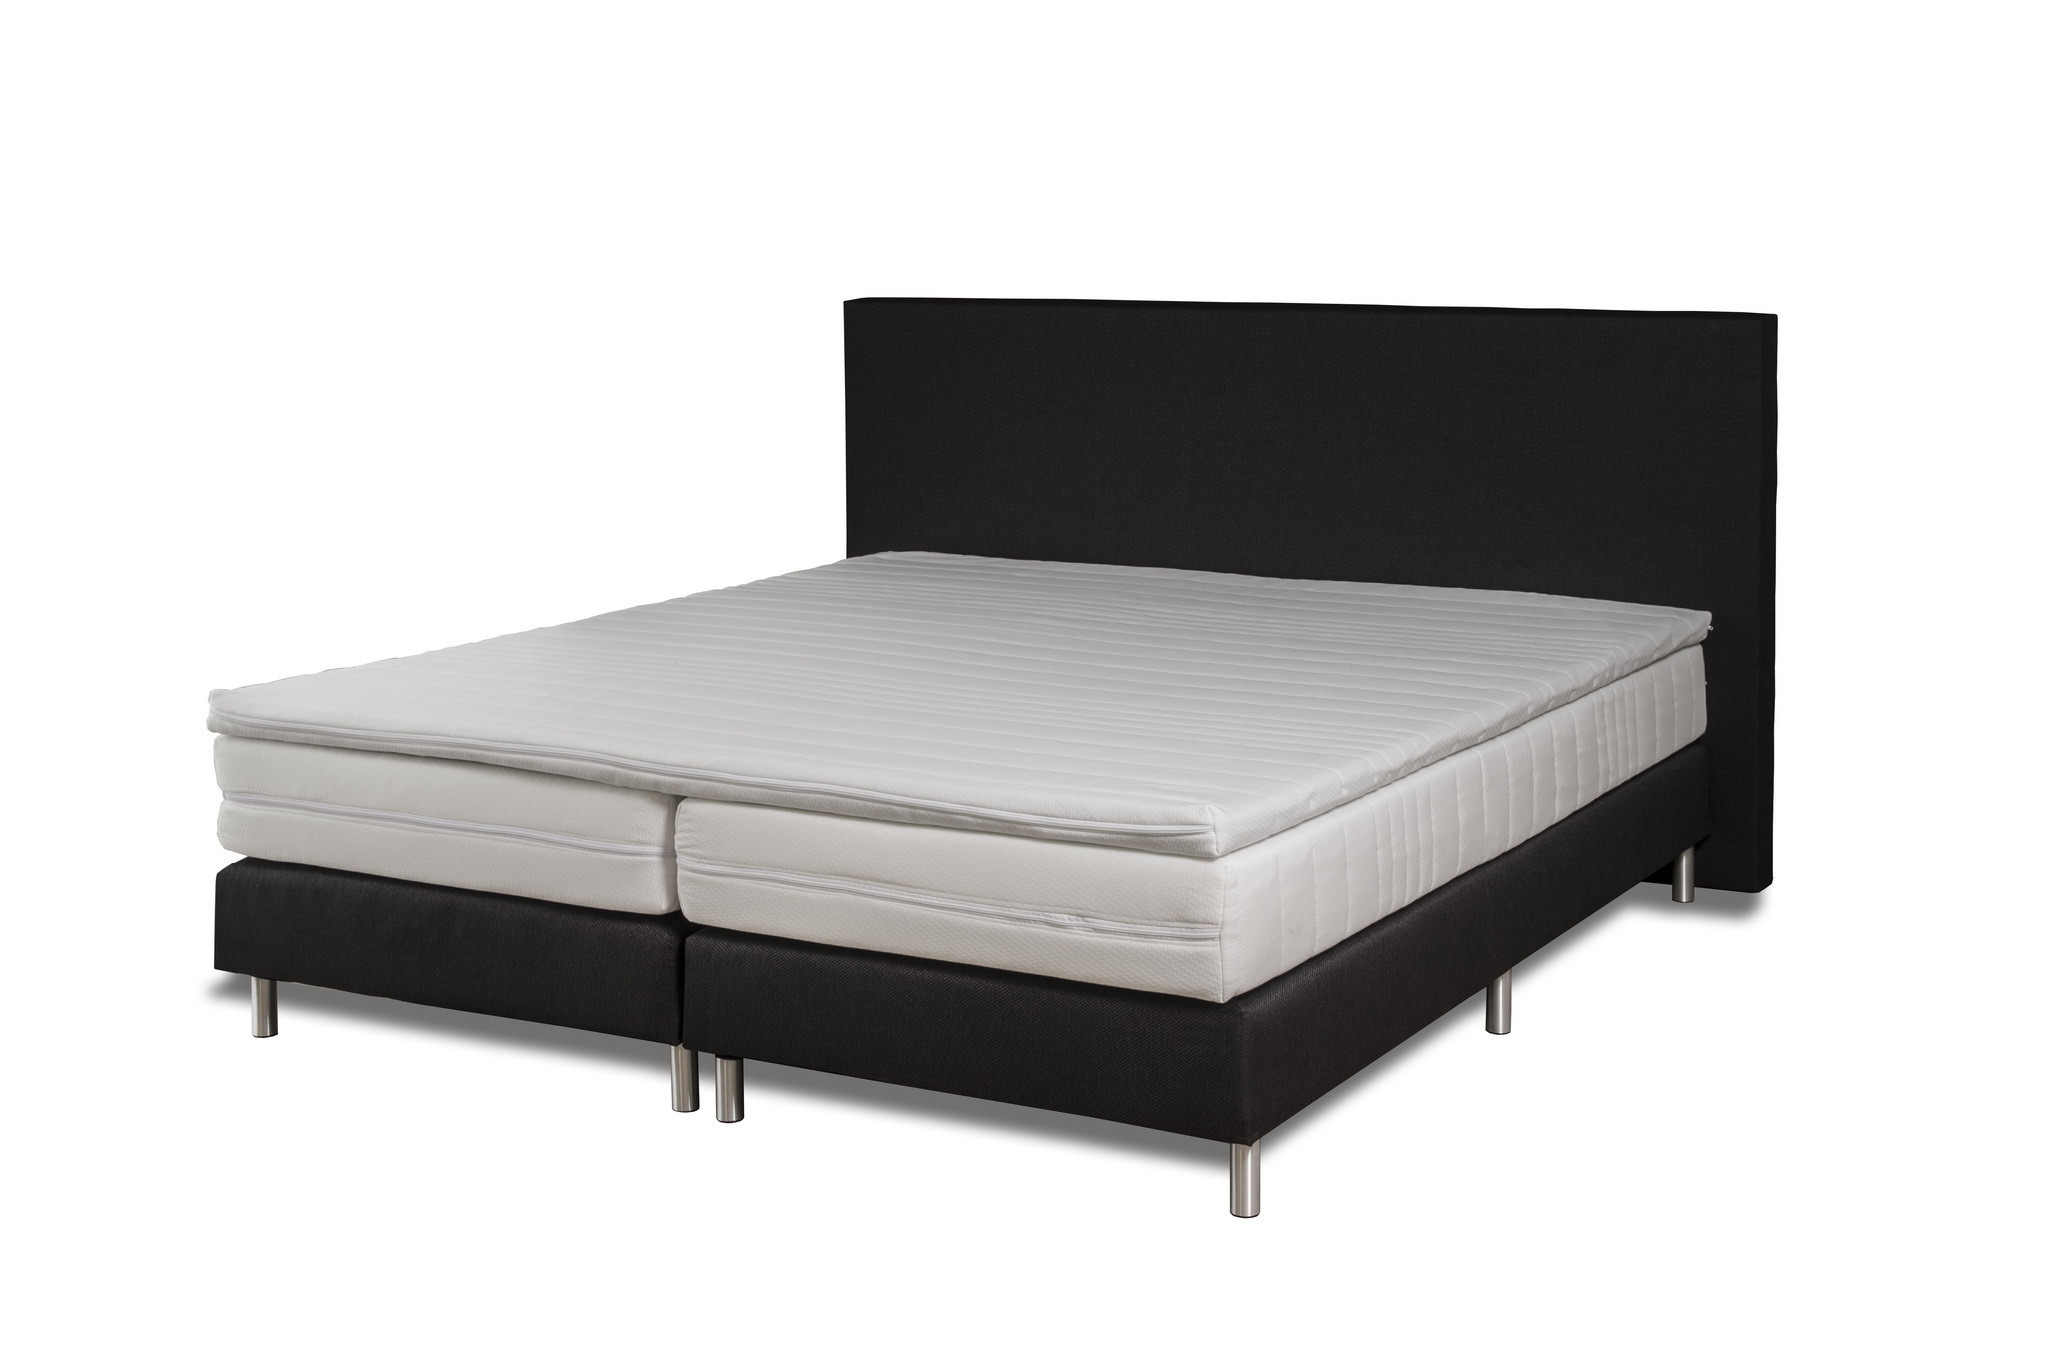 Rent a Boxspring bed 2 persons 160x200? Rent at KeyPro furniture rental!